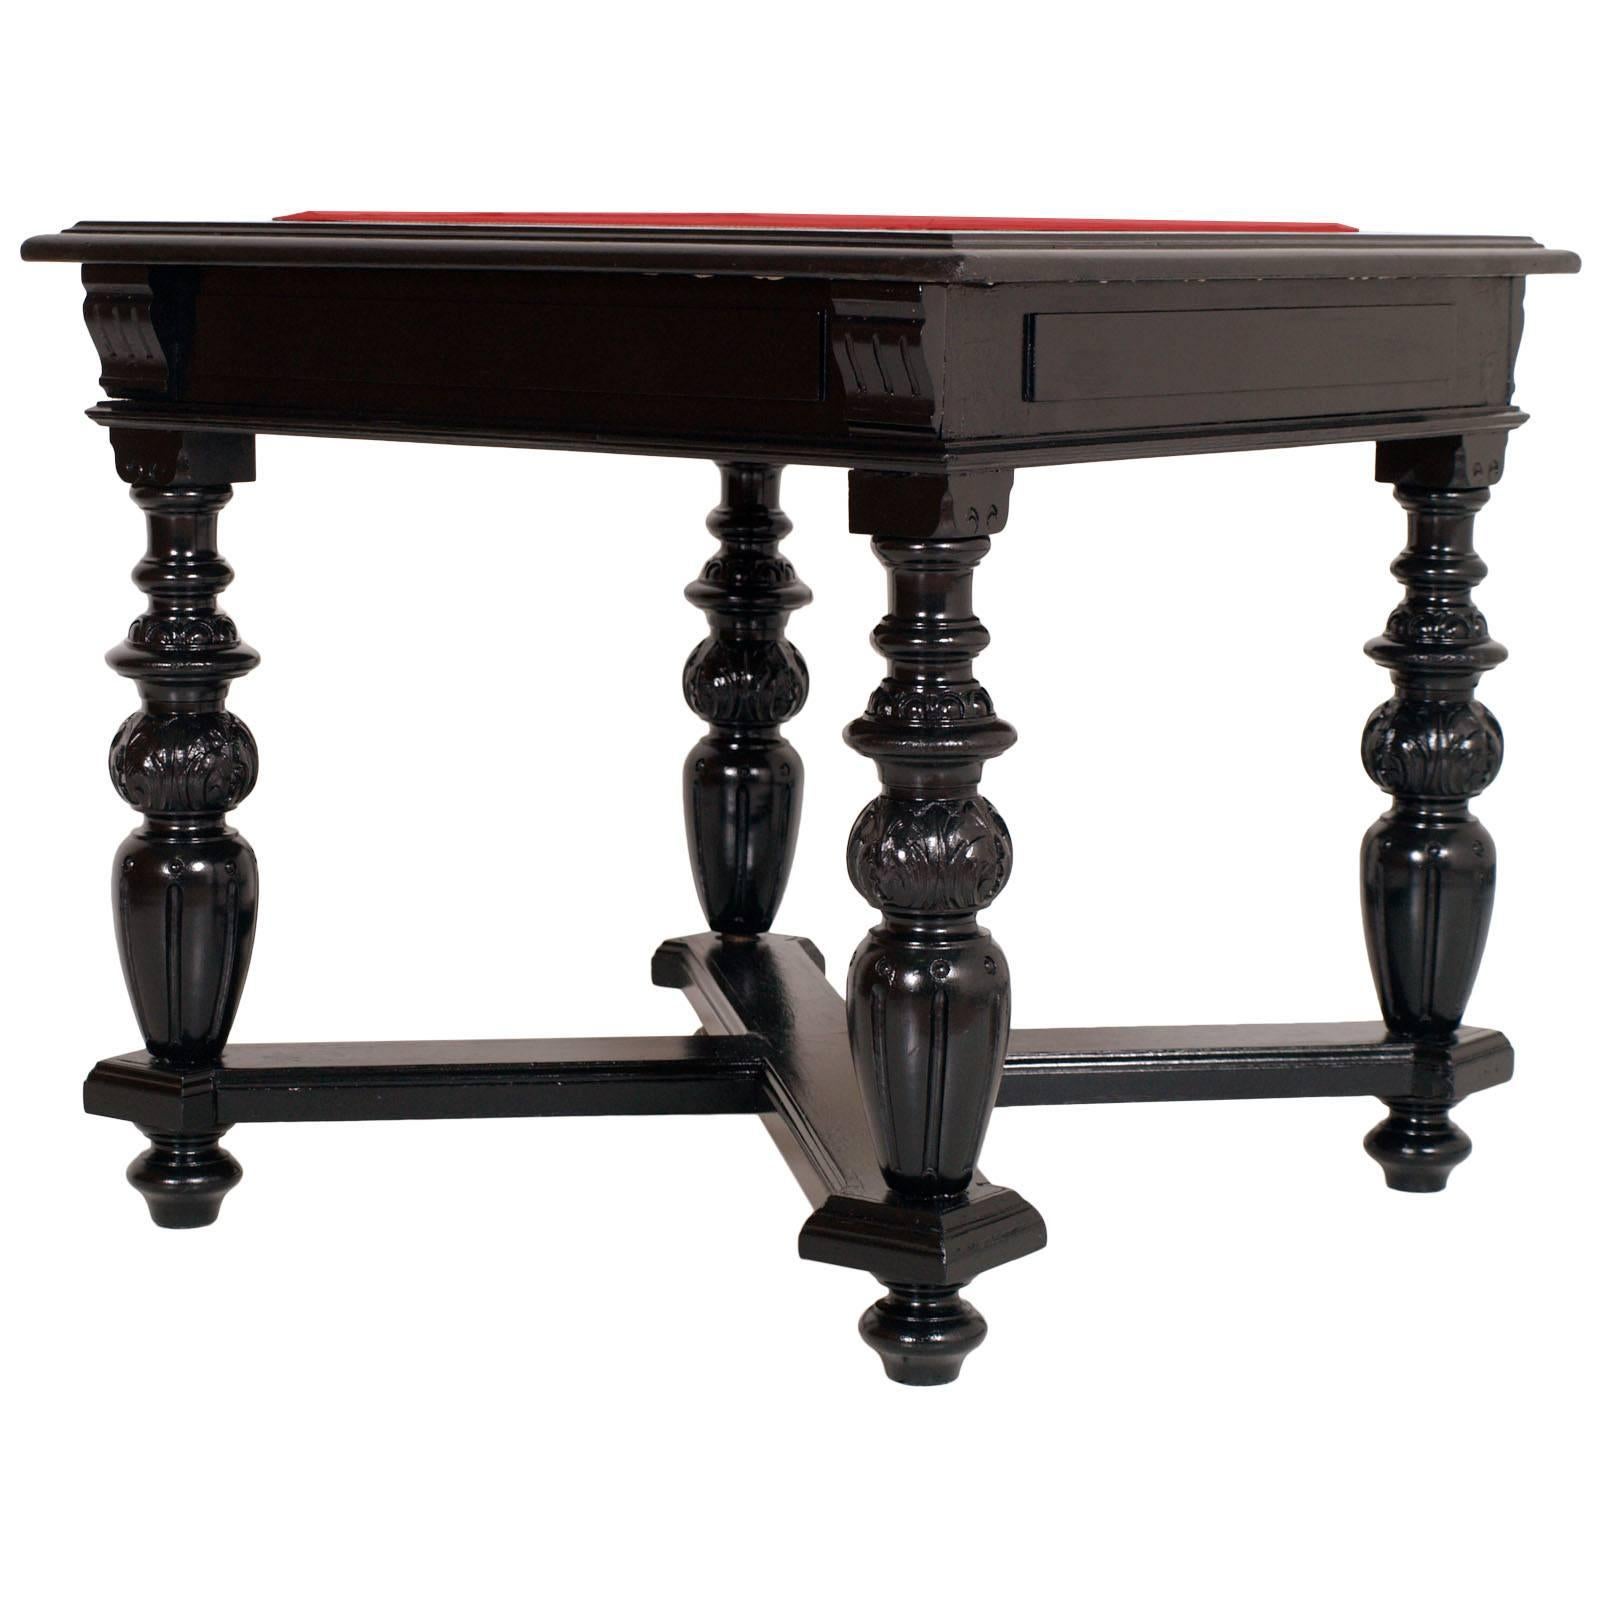 Tuscany antique neoclassical occasional or game table from the late 18th century. Solid ebonized walnut with turned legs and cross-shaped lower crosspiece. We made conservative restoration and re-upholstered the top with red velvet. Polished to